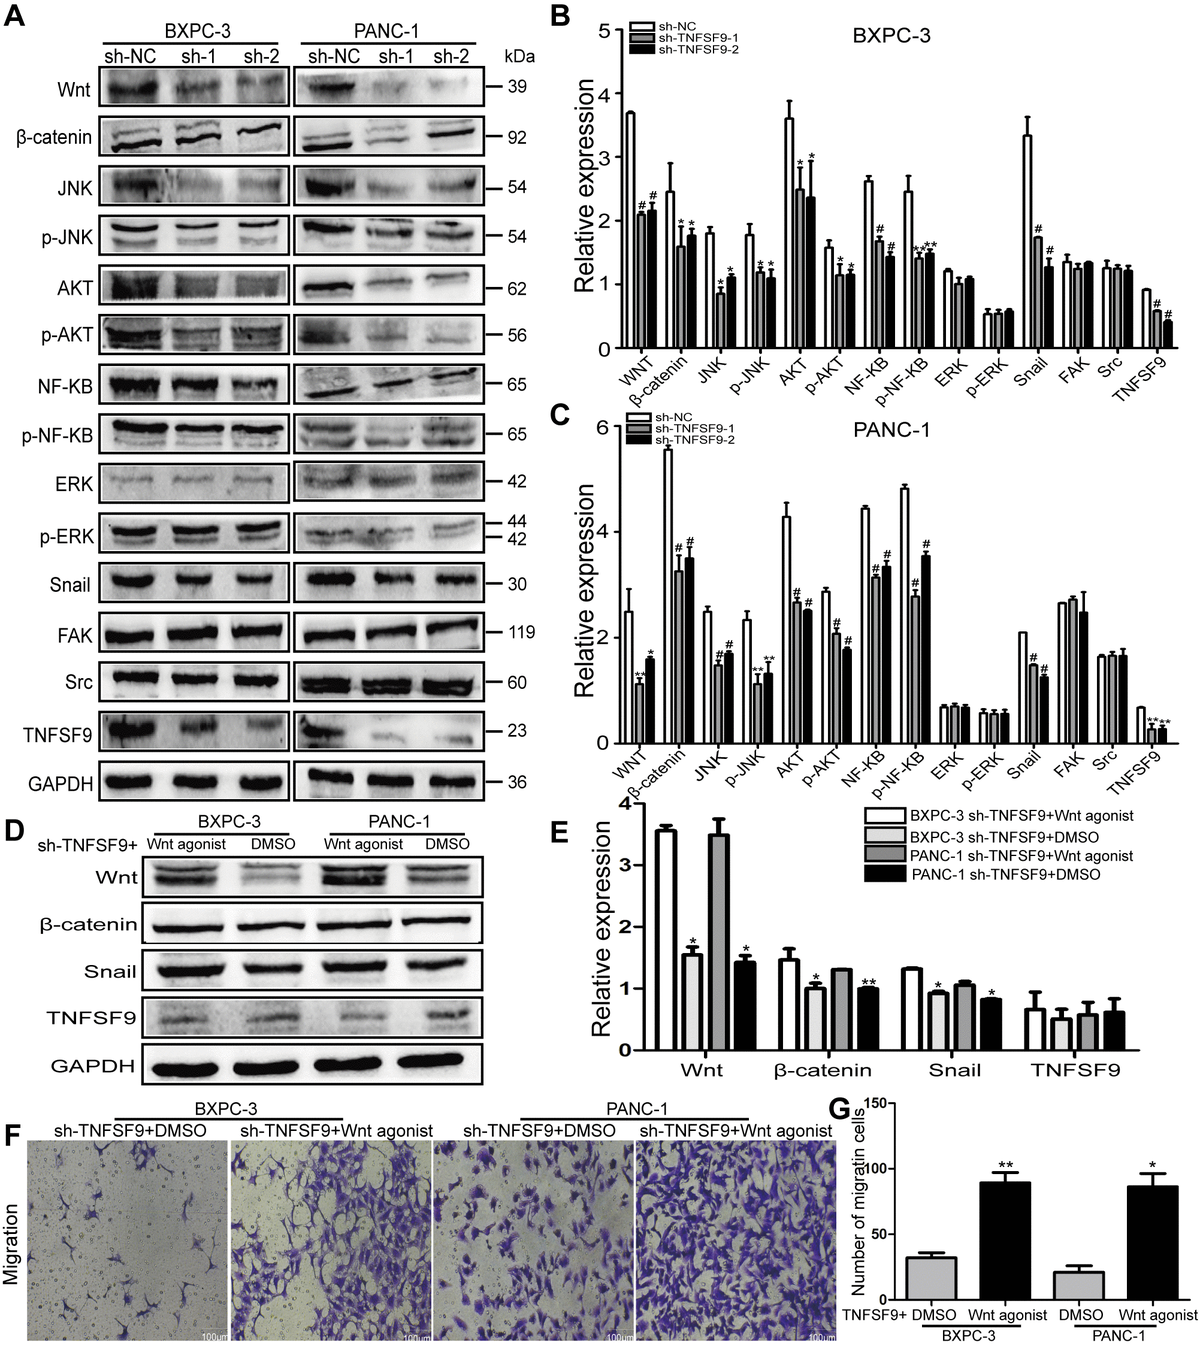 TNFSF9 promotes the migration of pancreatic cancer cells by activating the Wnt/Snail signaling pathway. (A–C) Western blot analysis the expression of Wnt, β-catenin, AKT, p-AKT, JNK, p-JNK, NF-ΚB, p-NF-ΚB, ERK p-ERK, Snail, Src and FAK in BXPC-3 and PANC-1 cells after knockdown of TNFSF9. Compared with the sh-NC group, the expression of Wnt, β-catenin, AKT, p-AKT, JNK, p-JNK, NF-ΚB, p-NF-ΚB and Snail in the sh-TNFSF9-1 and sh-TNFSF9-2 groups is significantly reduced. The expression of ERK, p-ERK, Src and FAK did not change. (D, E) The expression of Wnt, β-catenin, and Snail increased after the addition of Wnt agonist in TNFSF9 knockdown pancreatic cancer, but the expression of TNFSF9 did not change. (F, G) Increased migration of TNFSF9 knockdown pancreatic cancer cells after the addition of Wnt agonist. sh-1 is sh-TNFSF9-1. sh-2 is sh-TNFSF9-2. *P **P ***P #P 